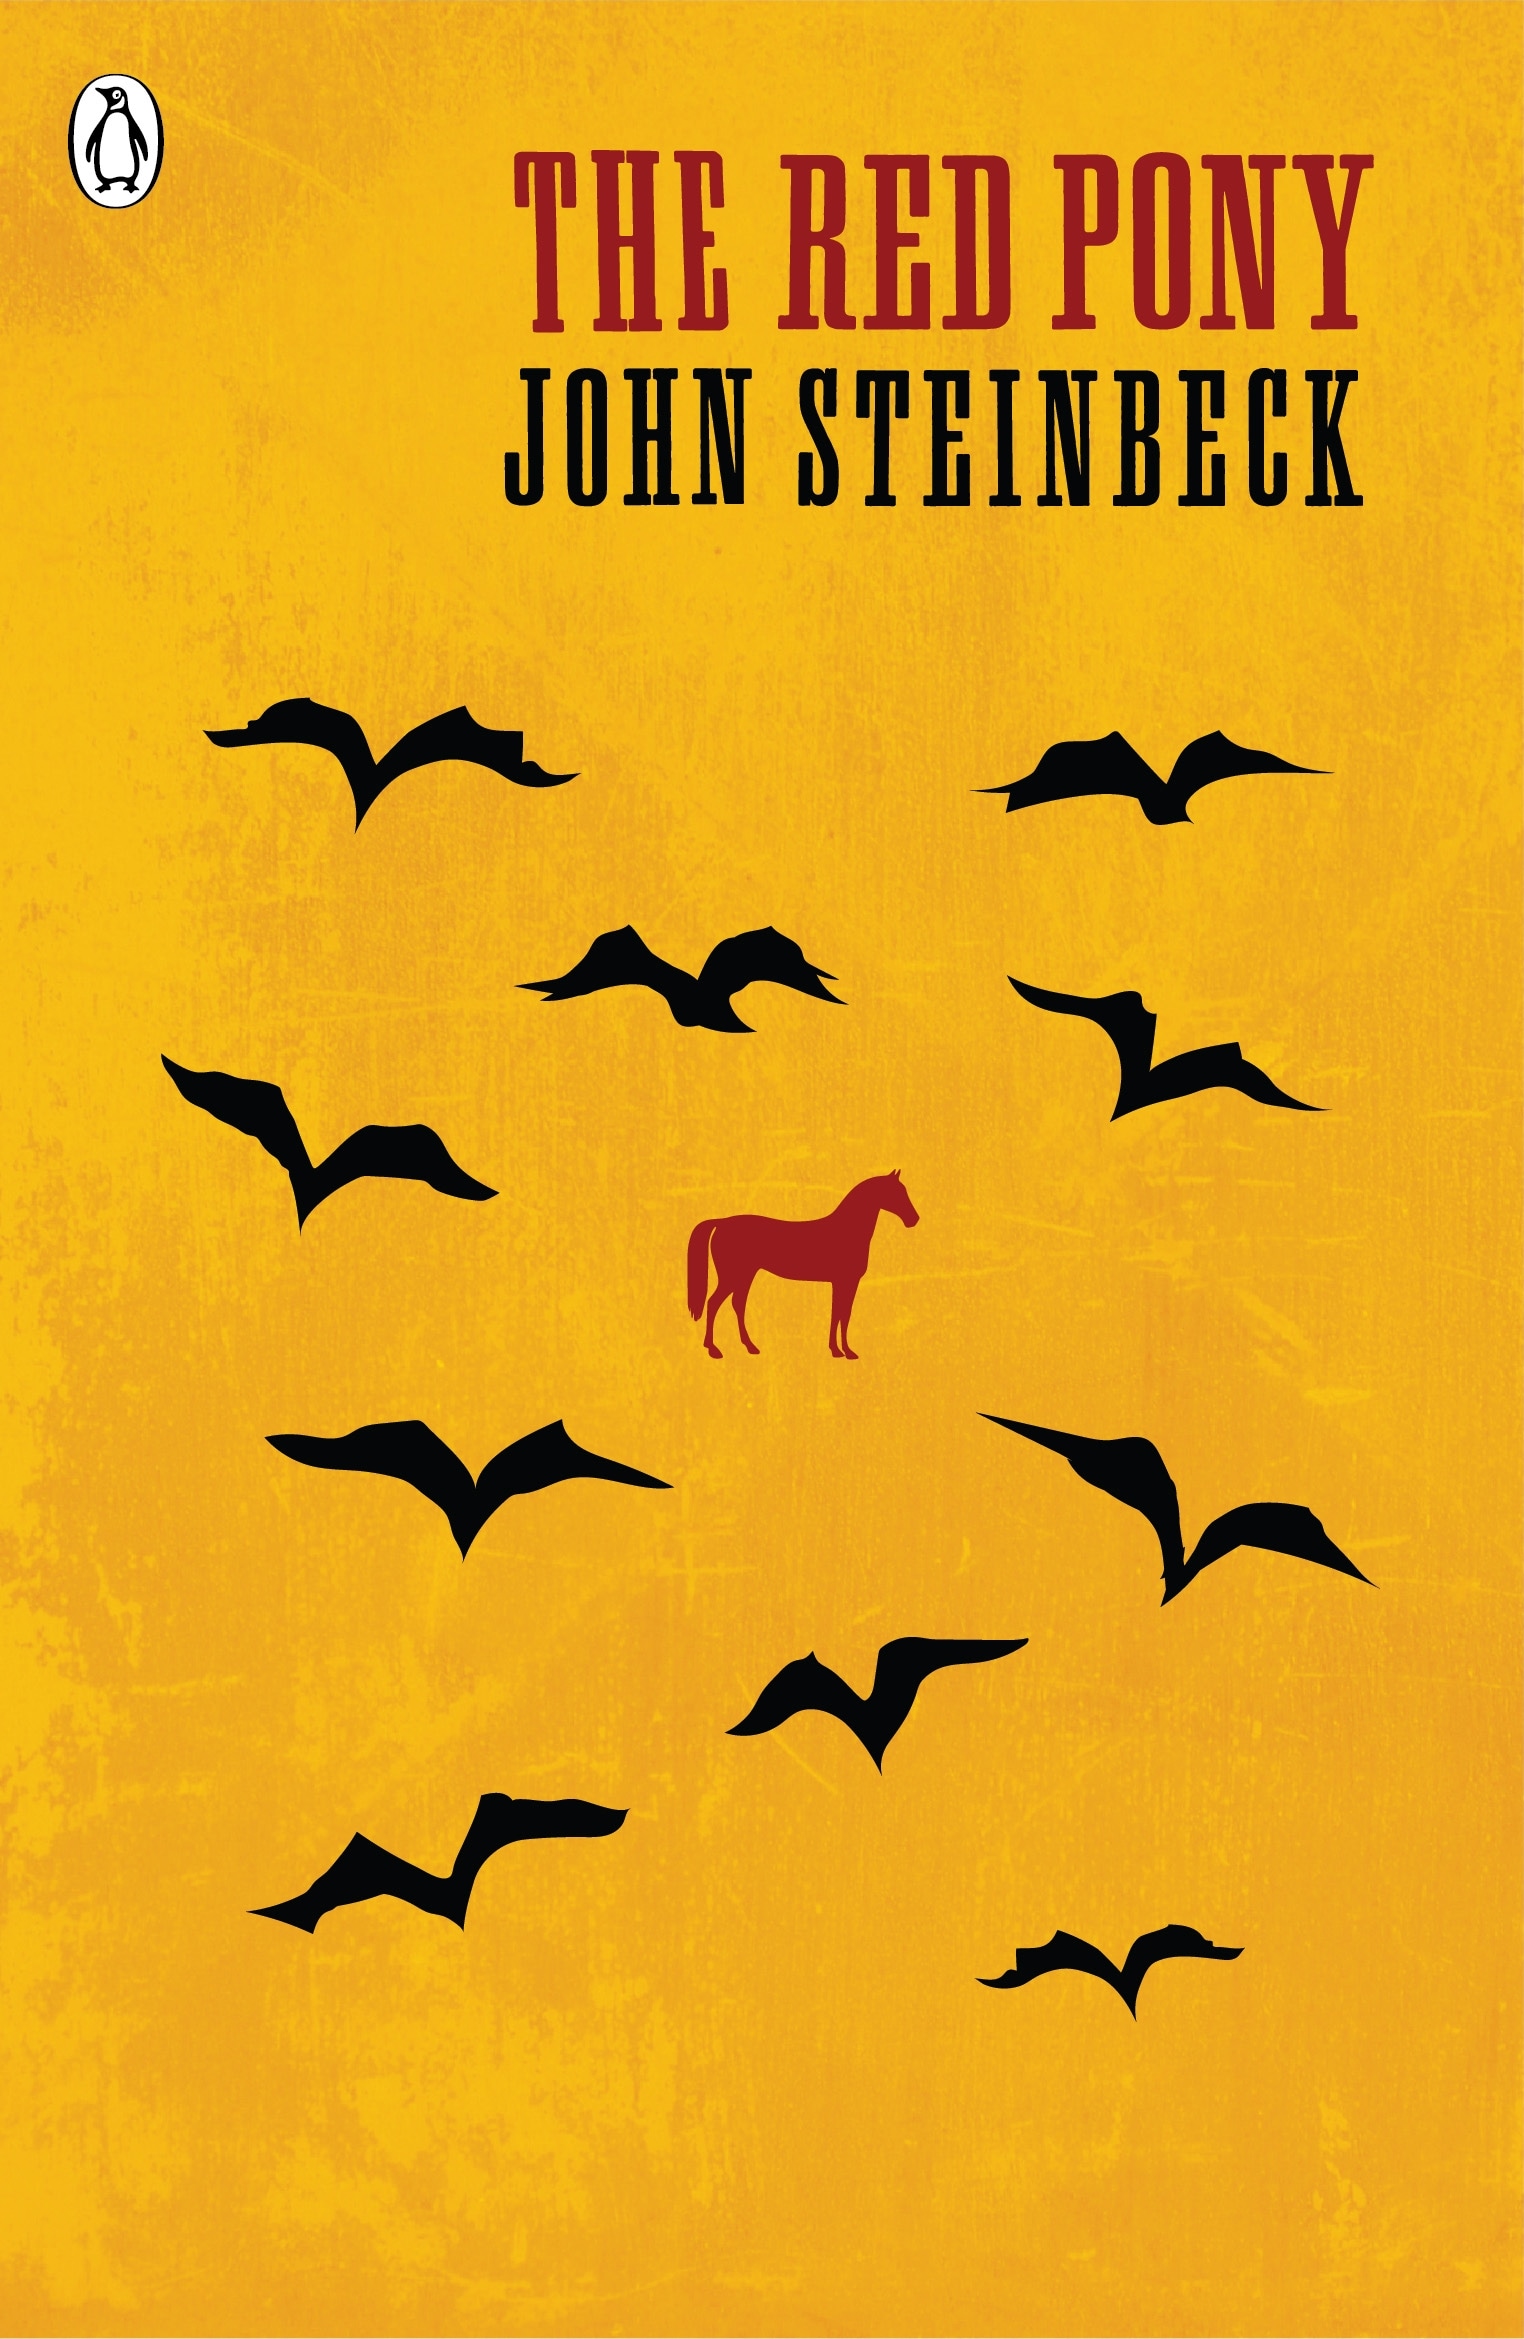 Book “The Red Pony” by John Steinbeck — August 4, 2016